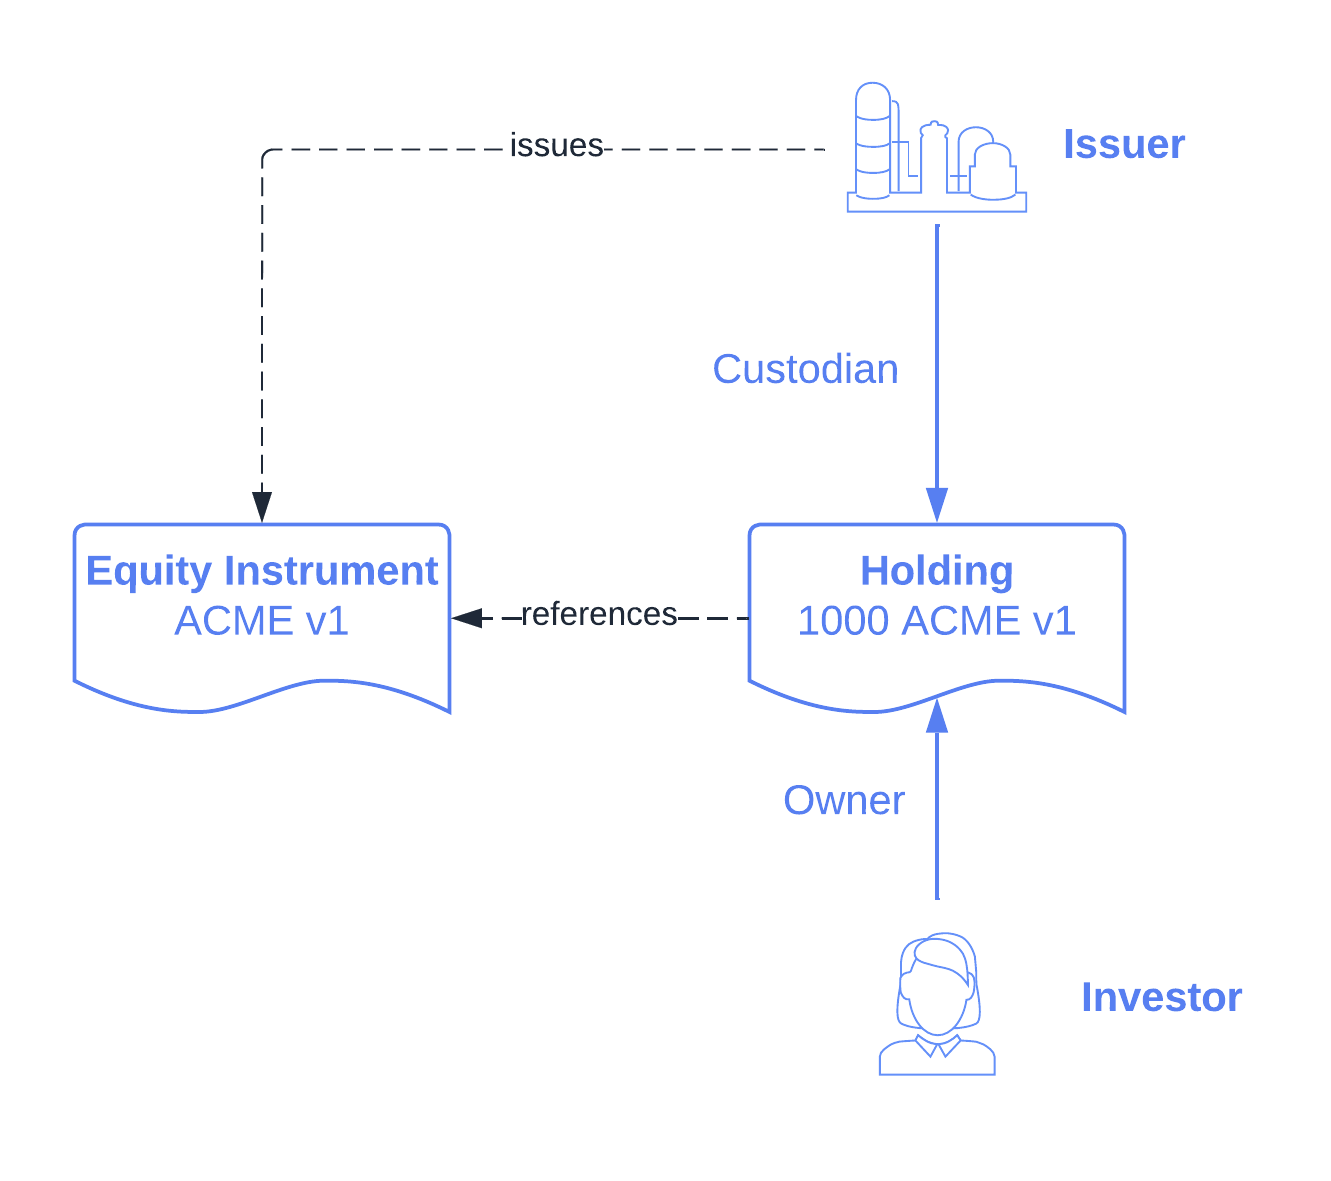 The issuer issues the ACME instrument. The investor owns a holding of 1000 ACME shares (version 1). The holding references the instrument.